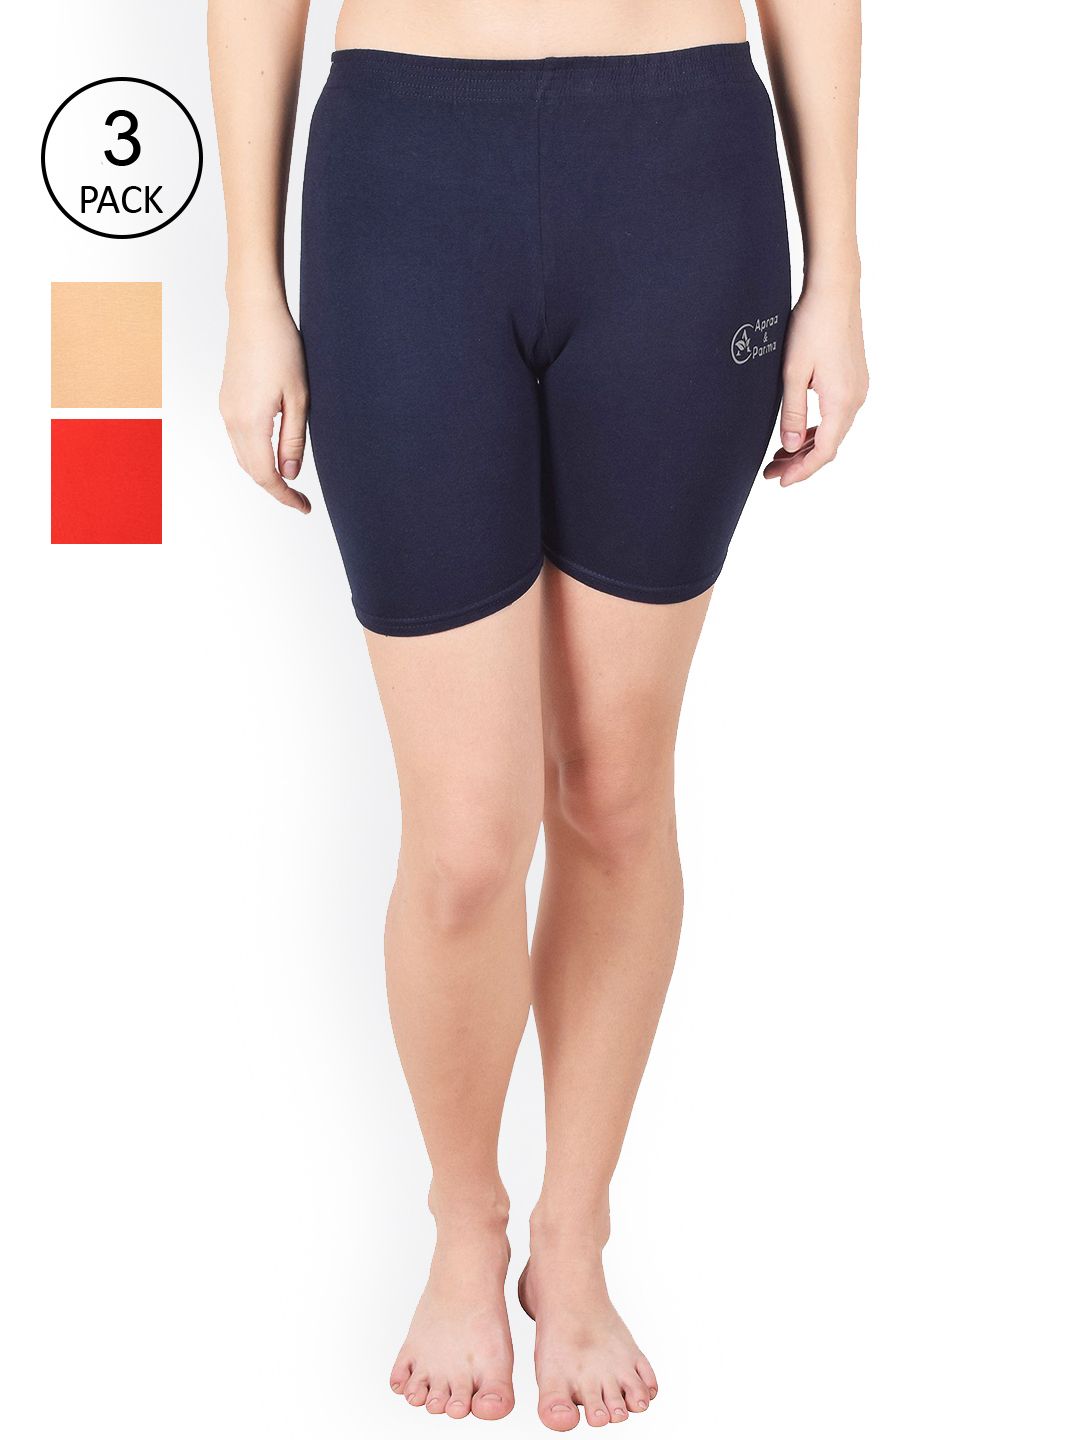 Apraa & Parma Women Beige Slim Fit Cycling Sports Shorts Price in India